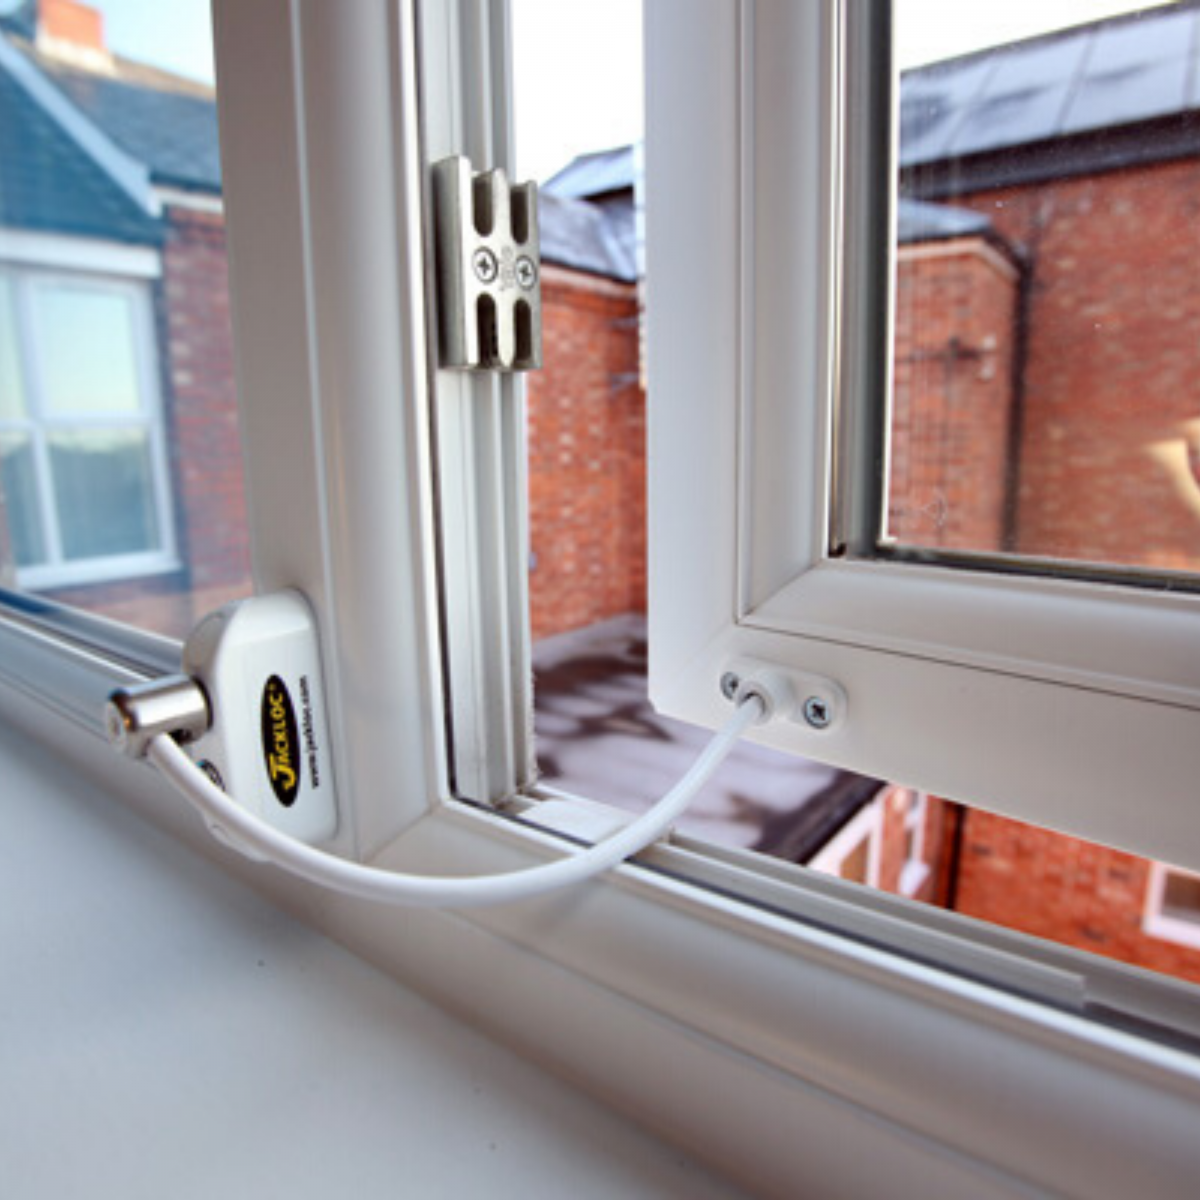 Open window with Jackloc restrictor fitted